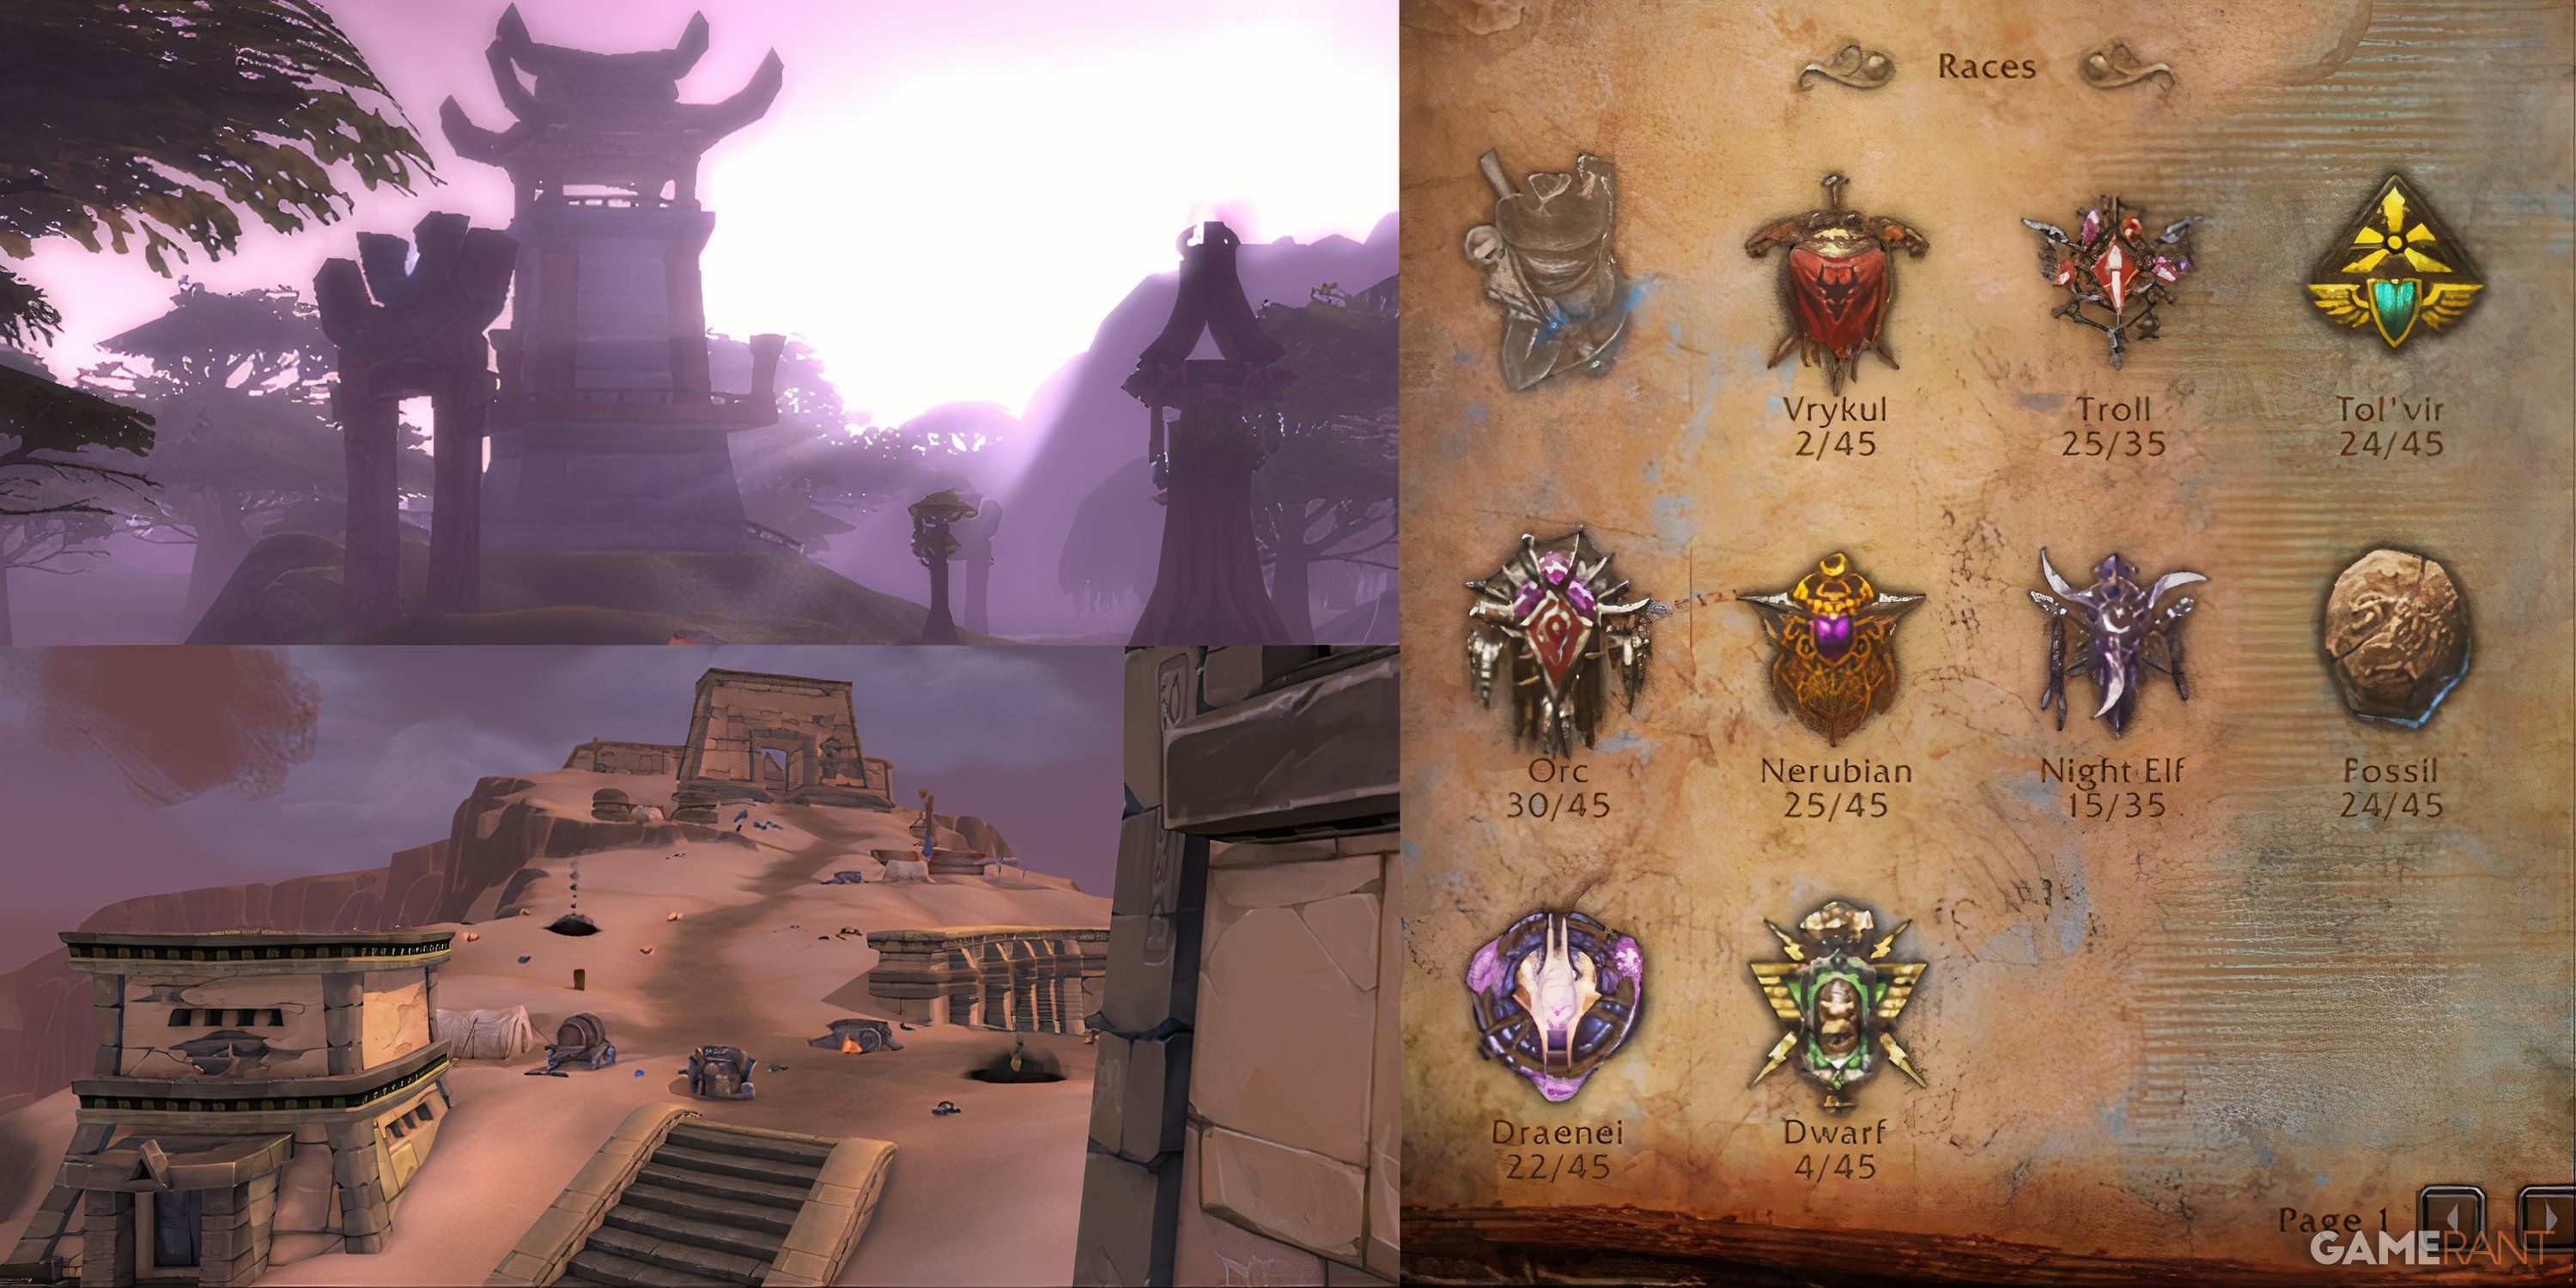 title image archaeology races ranked by level wow cataclysm